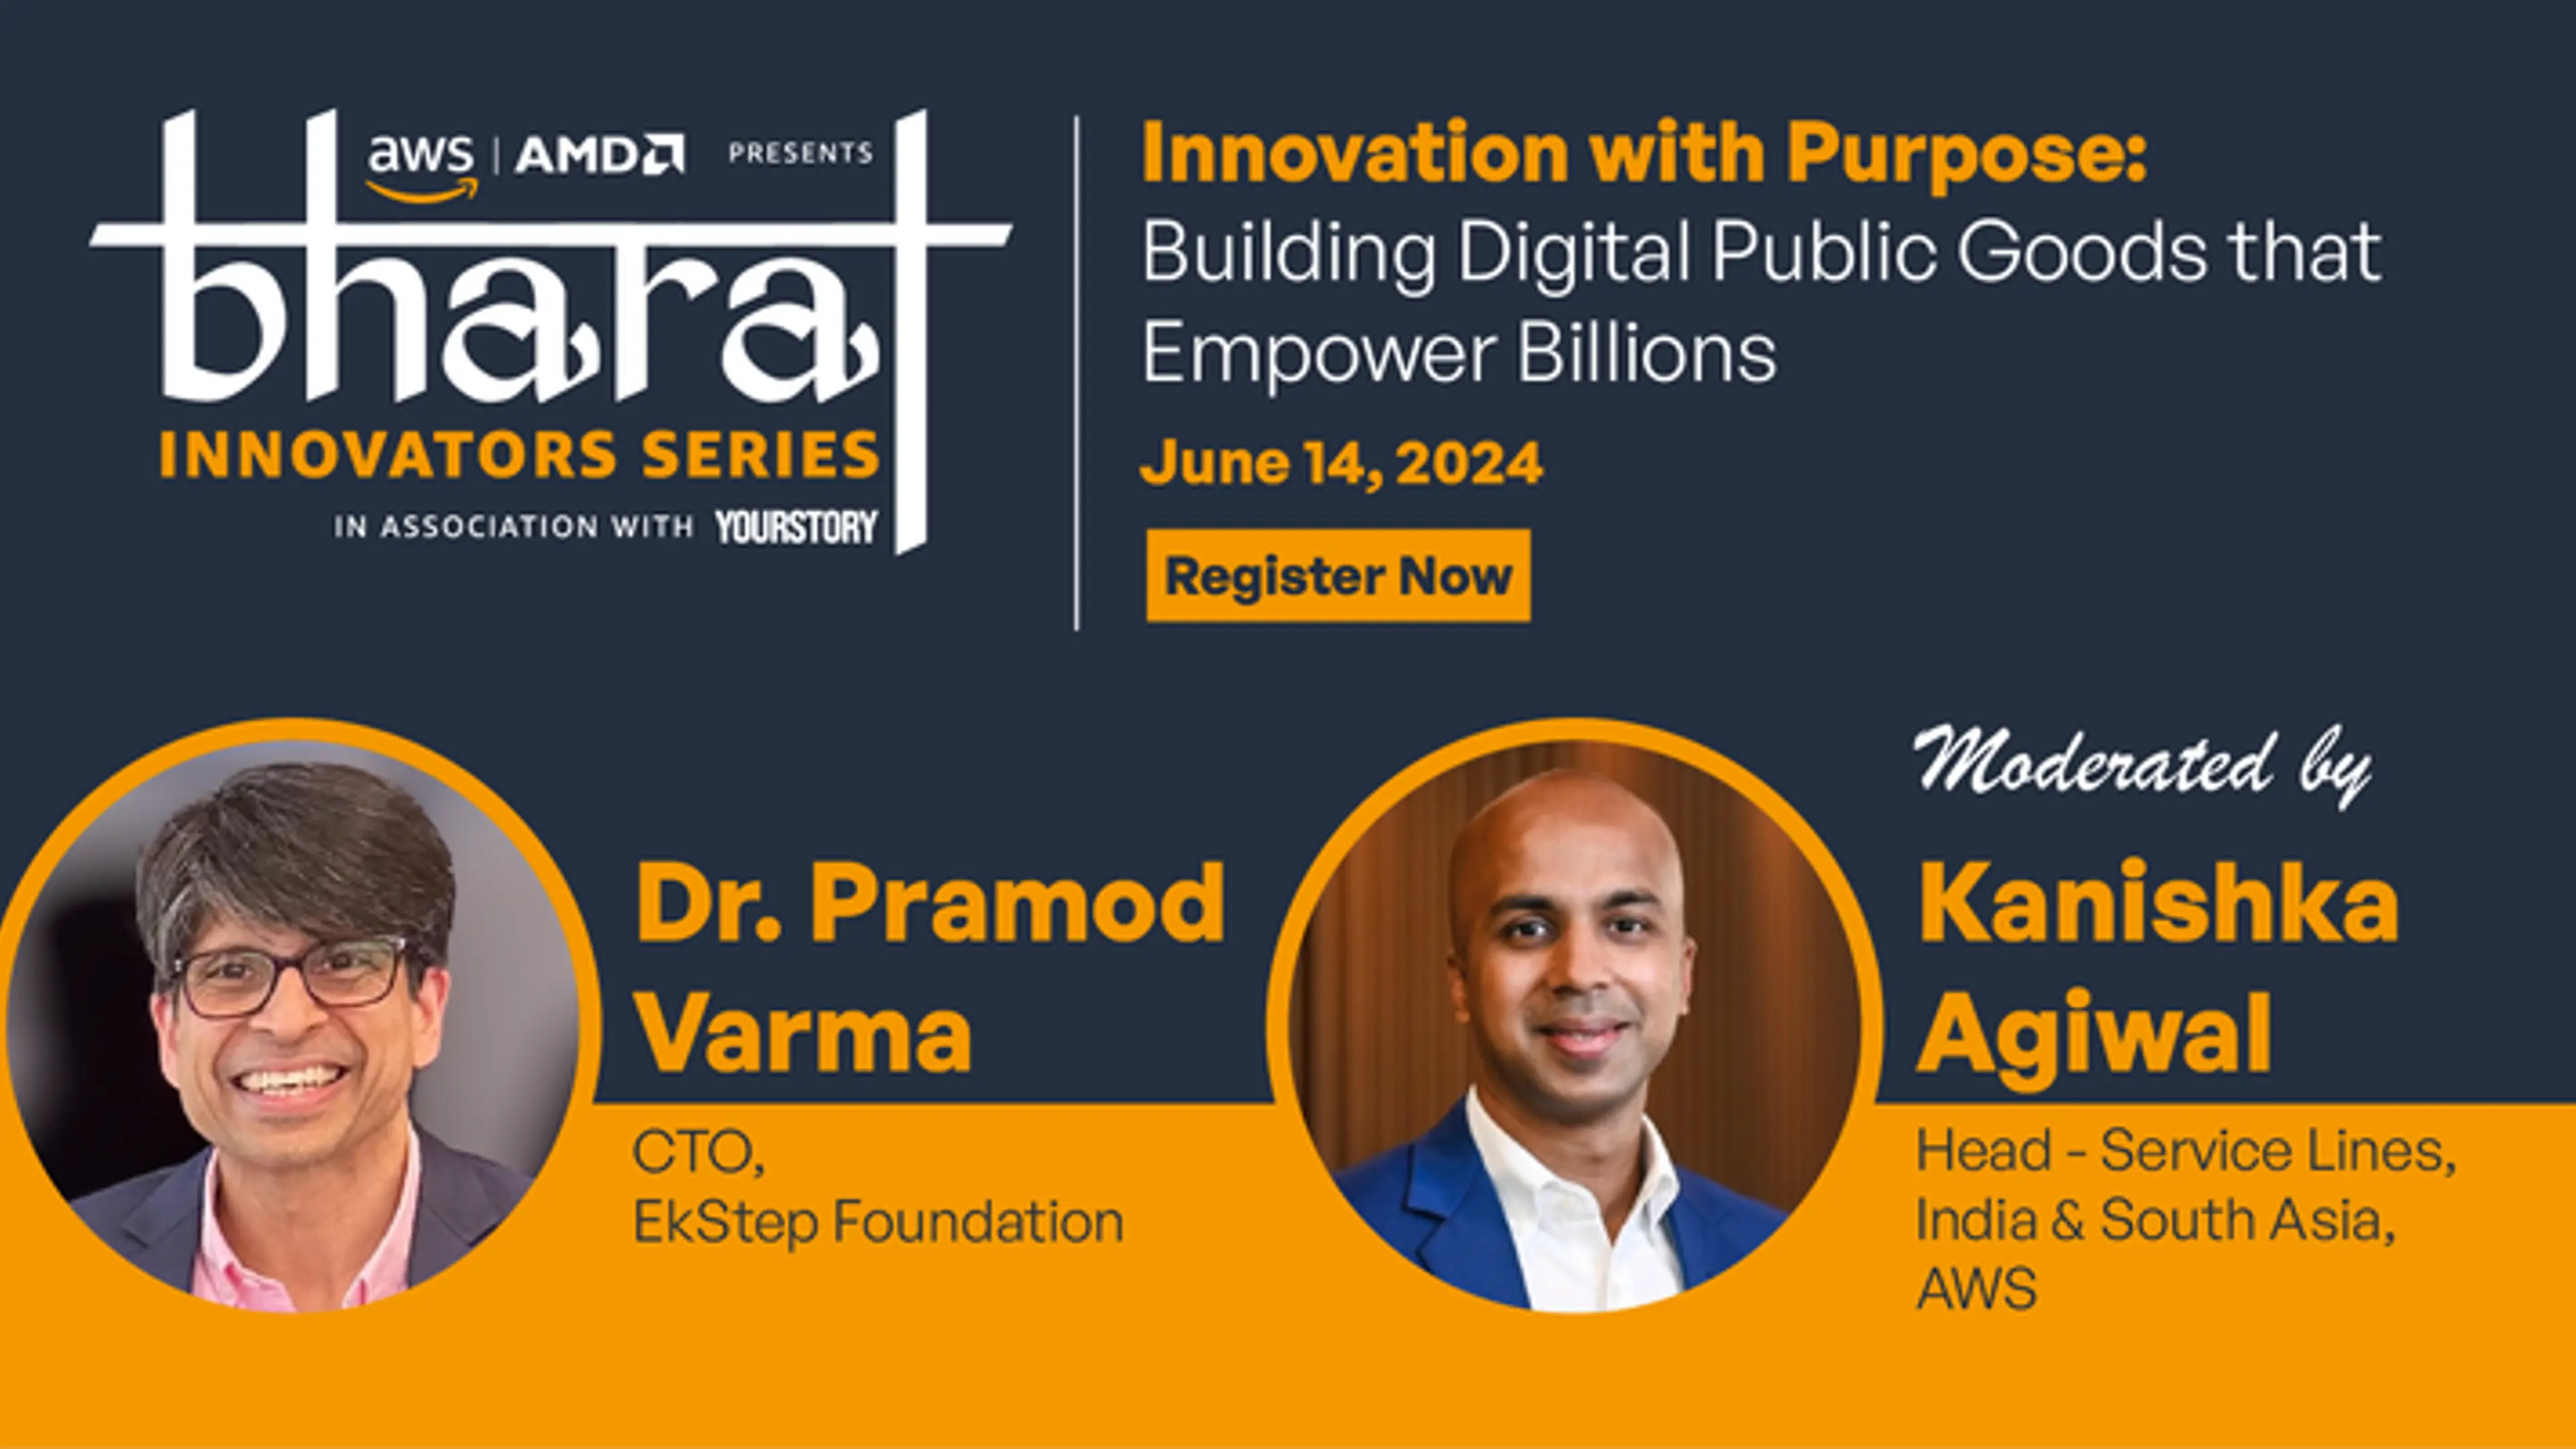 Join the conversation on purpose-driven tech innovation with AWS Bharat Innovators and EkStep Foundation